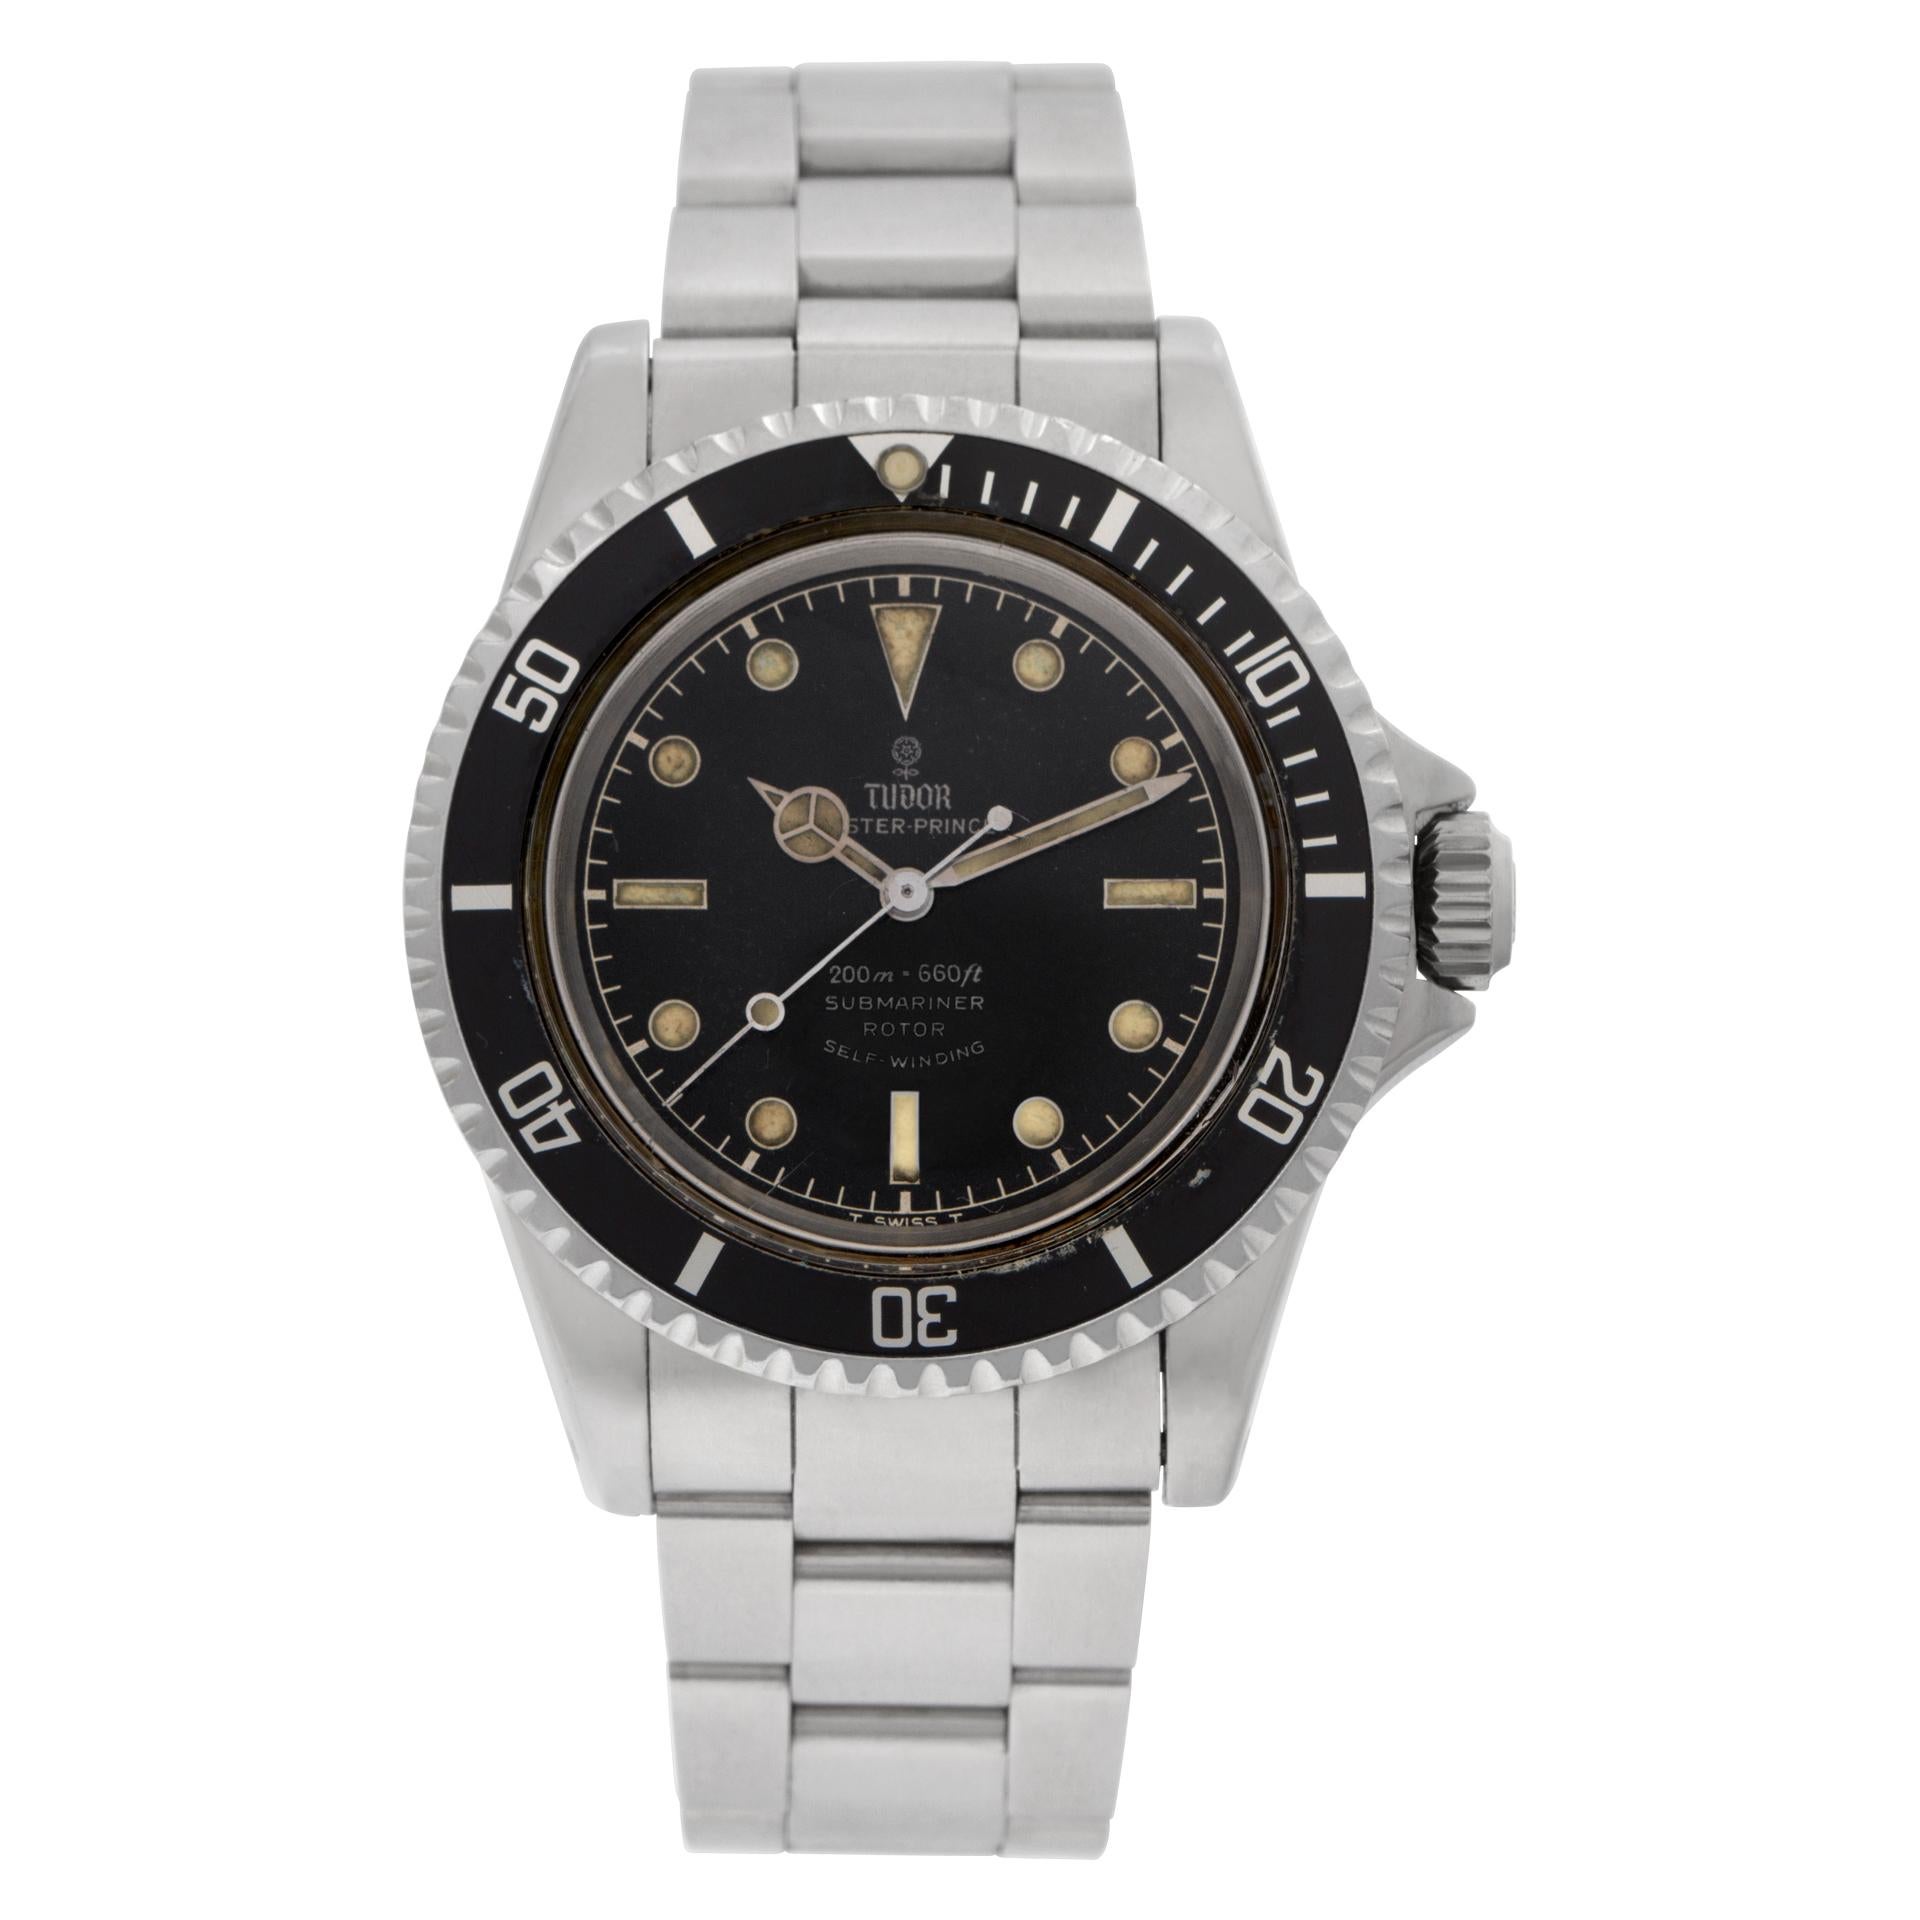 Tudor Submariner stainless steel Auto Wristwatch No Date Ref 7928 For Sale